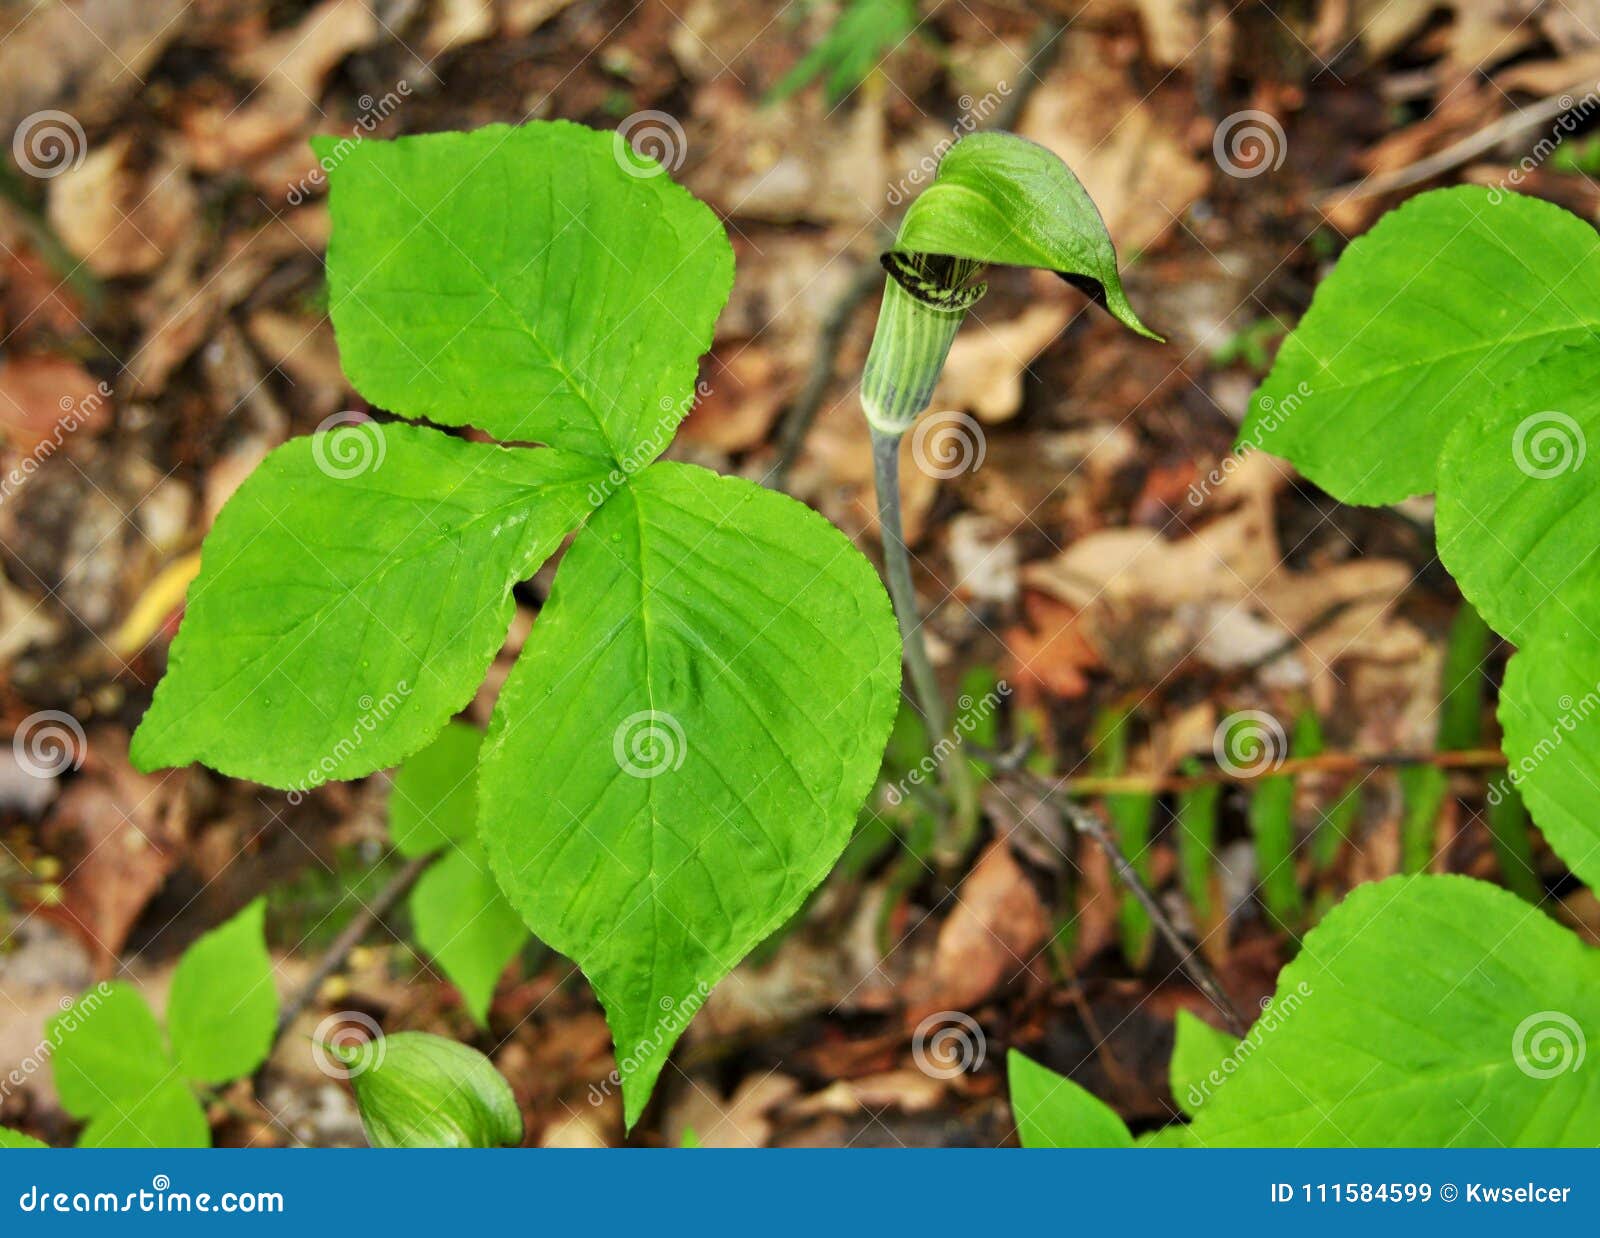 Bright Green Leaves And Green And Purple Flower Of A Jack In The Pulpit Plant Stock Image Image Of Flower Green 111584599